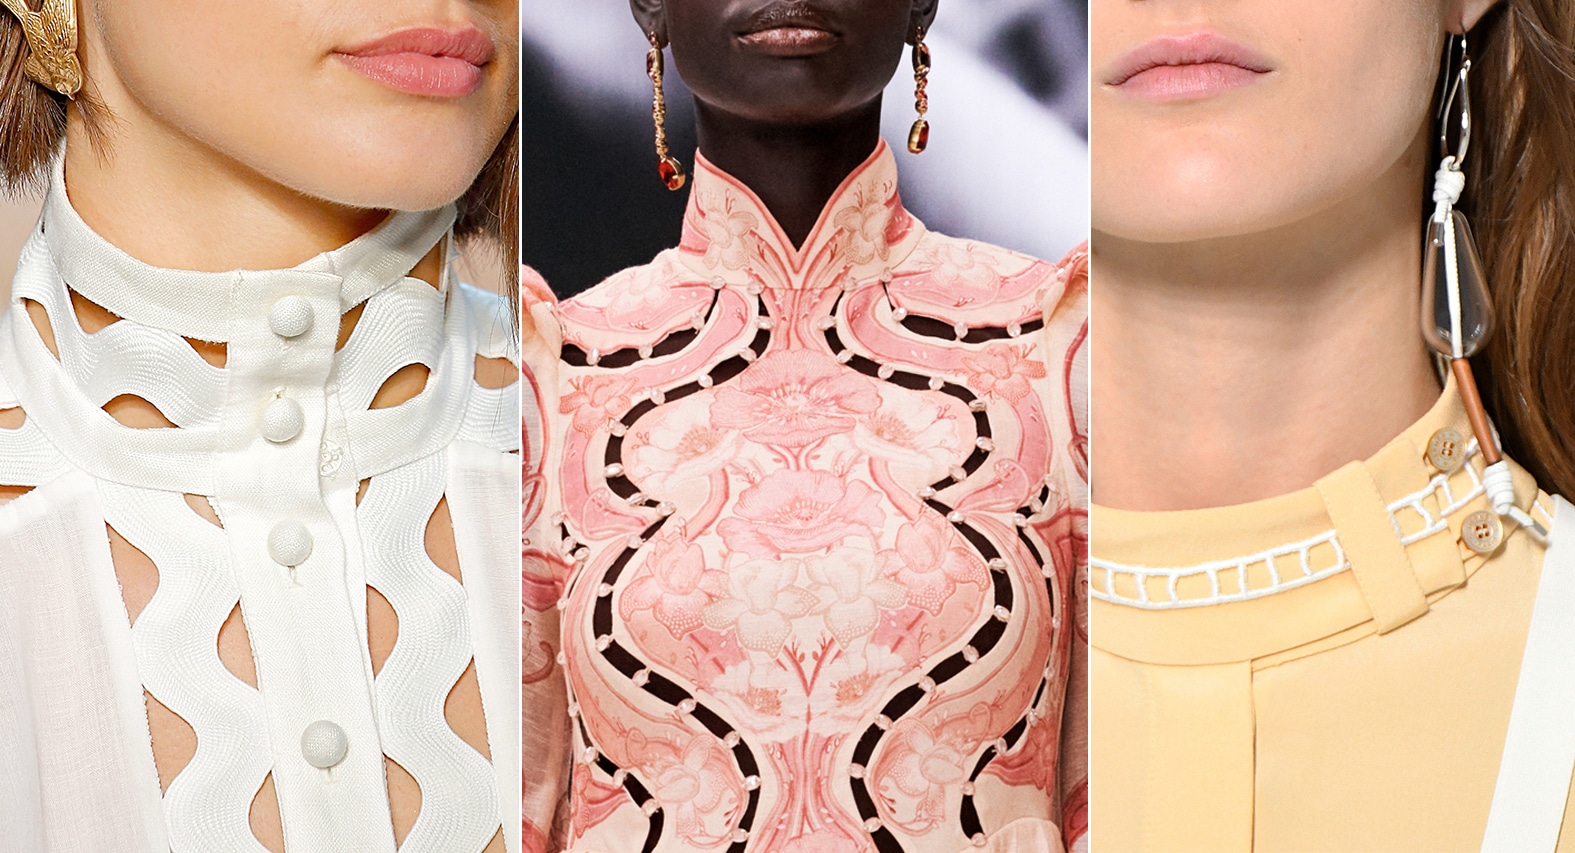 Inspiration Runway: Creative collar designs on the runway by Zimmermann and Hermès